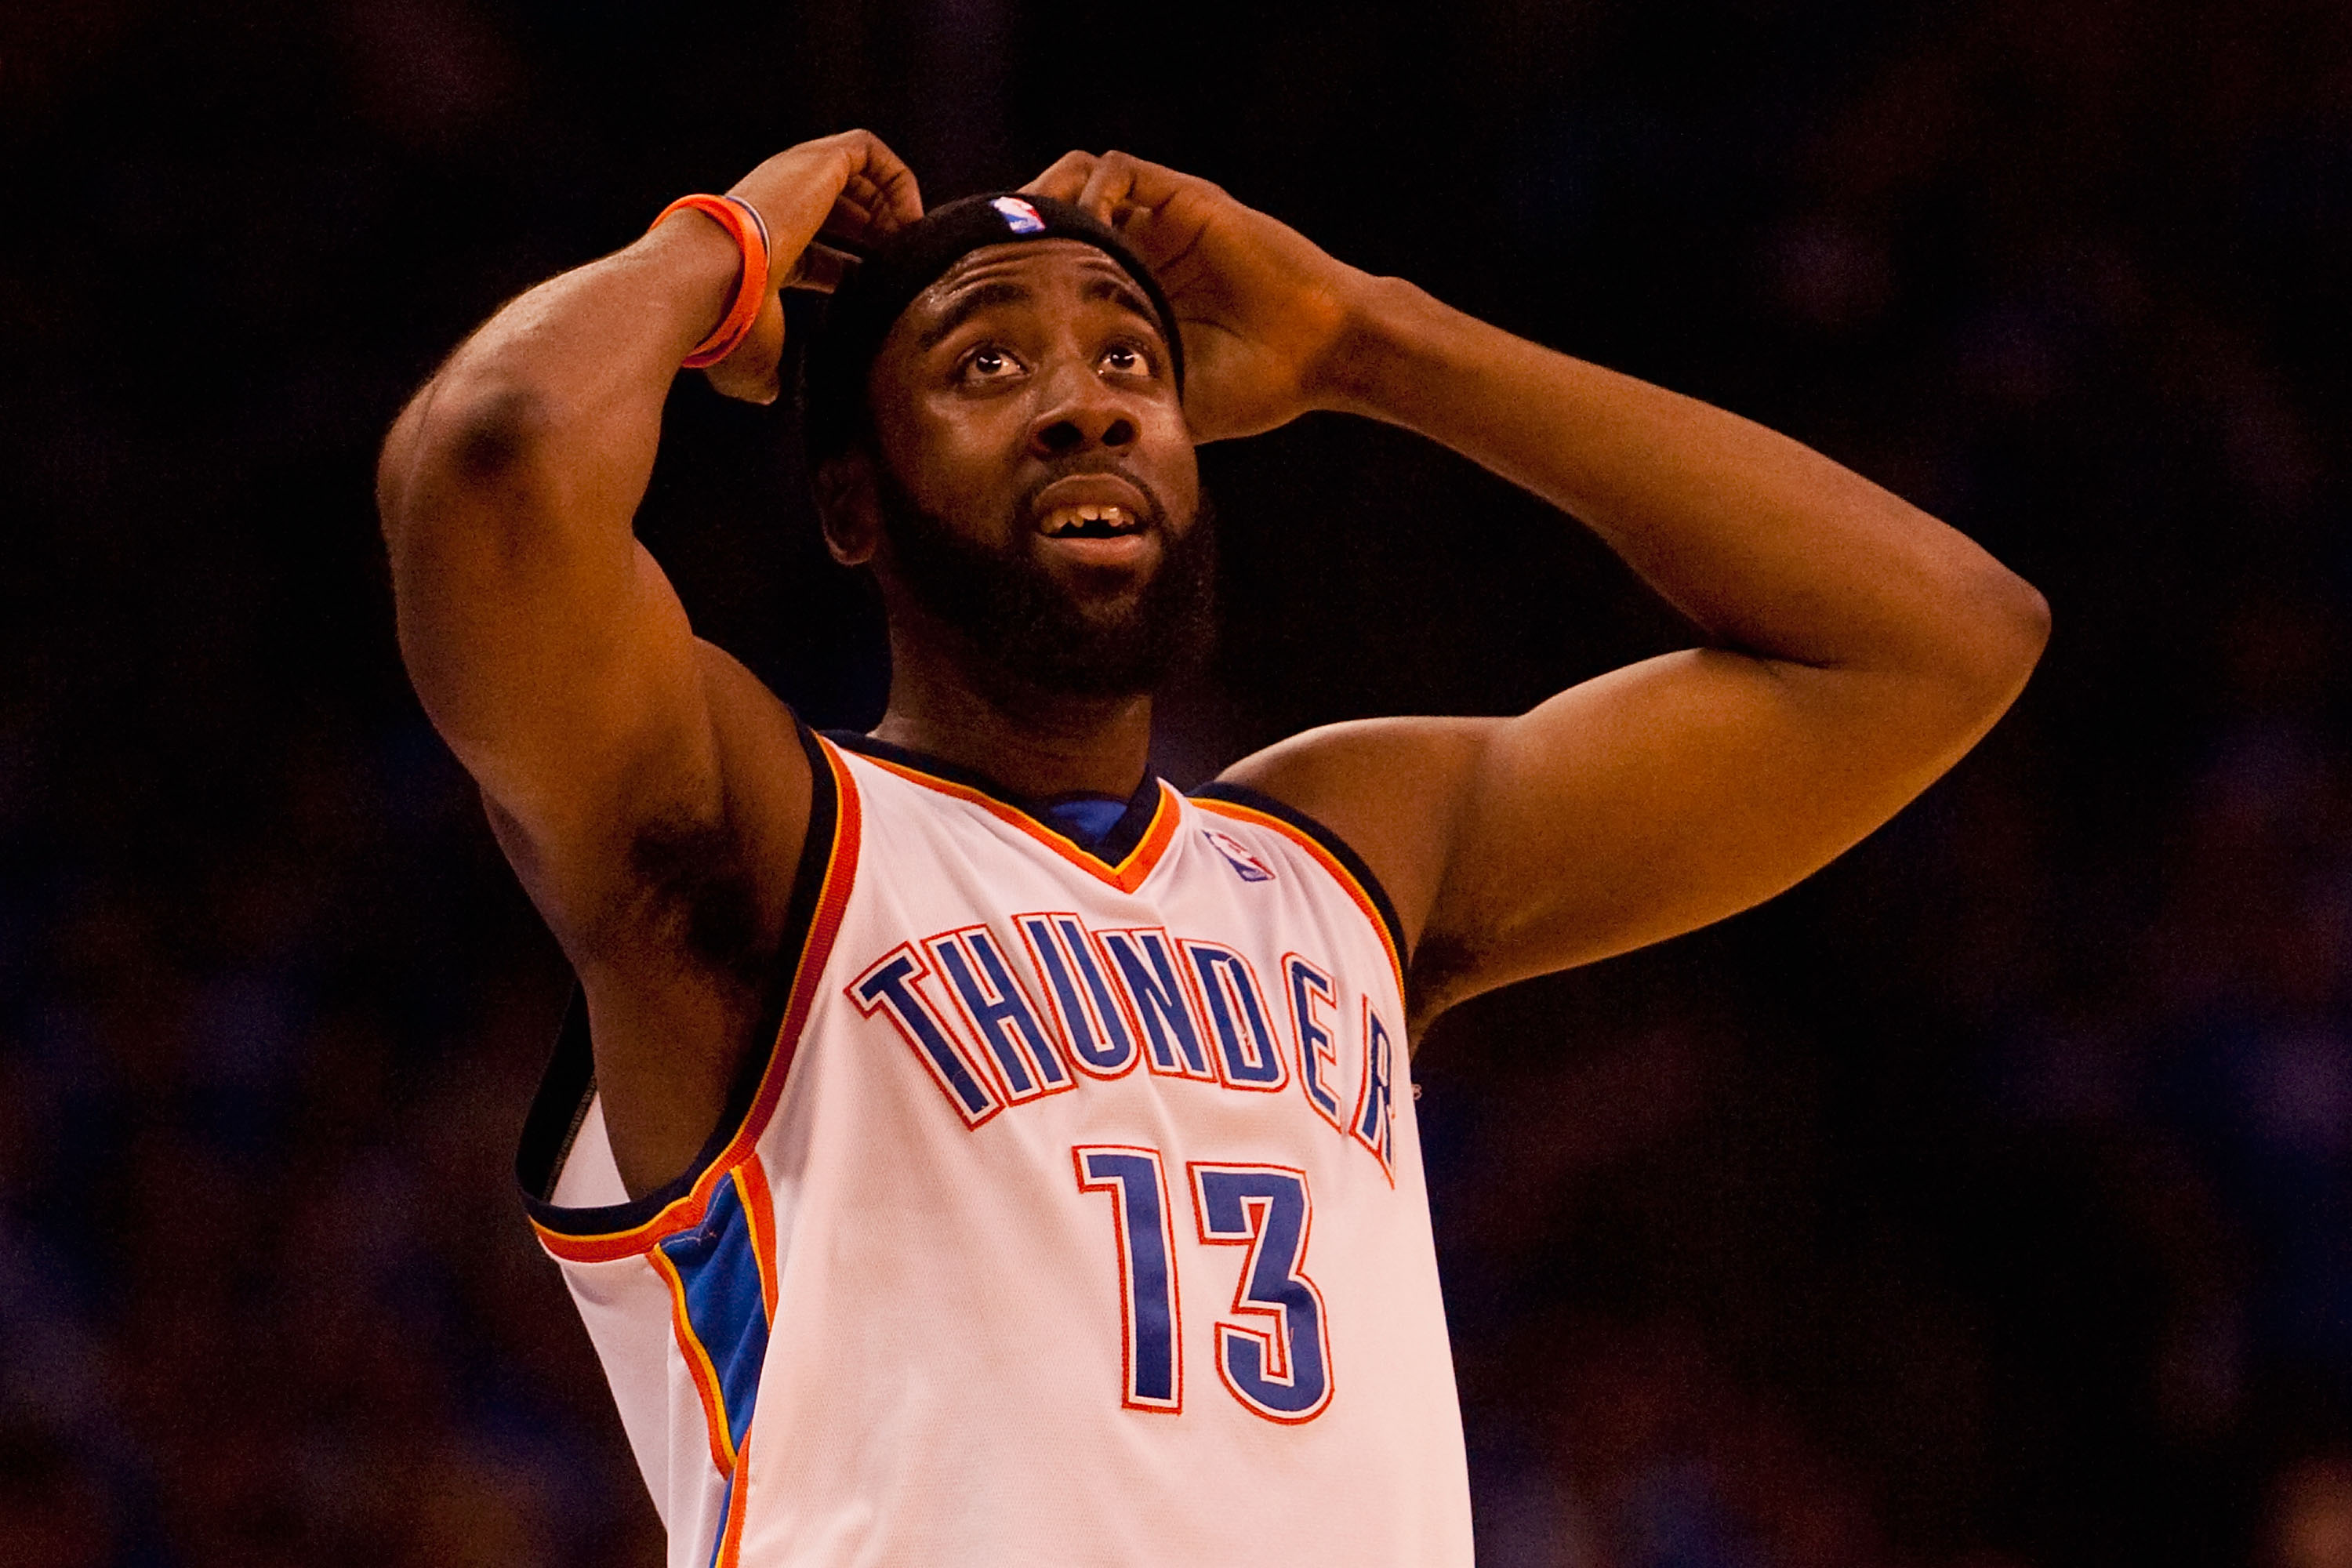 OKLAHOMA CITY - APRIL 22: James Harden #13 of the Oklahoma City Thunder reacts to a foul called on him against the Los Angeles Lakers during Game Three of the Western Conference Quarterfinals of the 2010 NBA Playoffs on April 22, 2010 at the Ford Center i